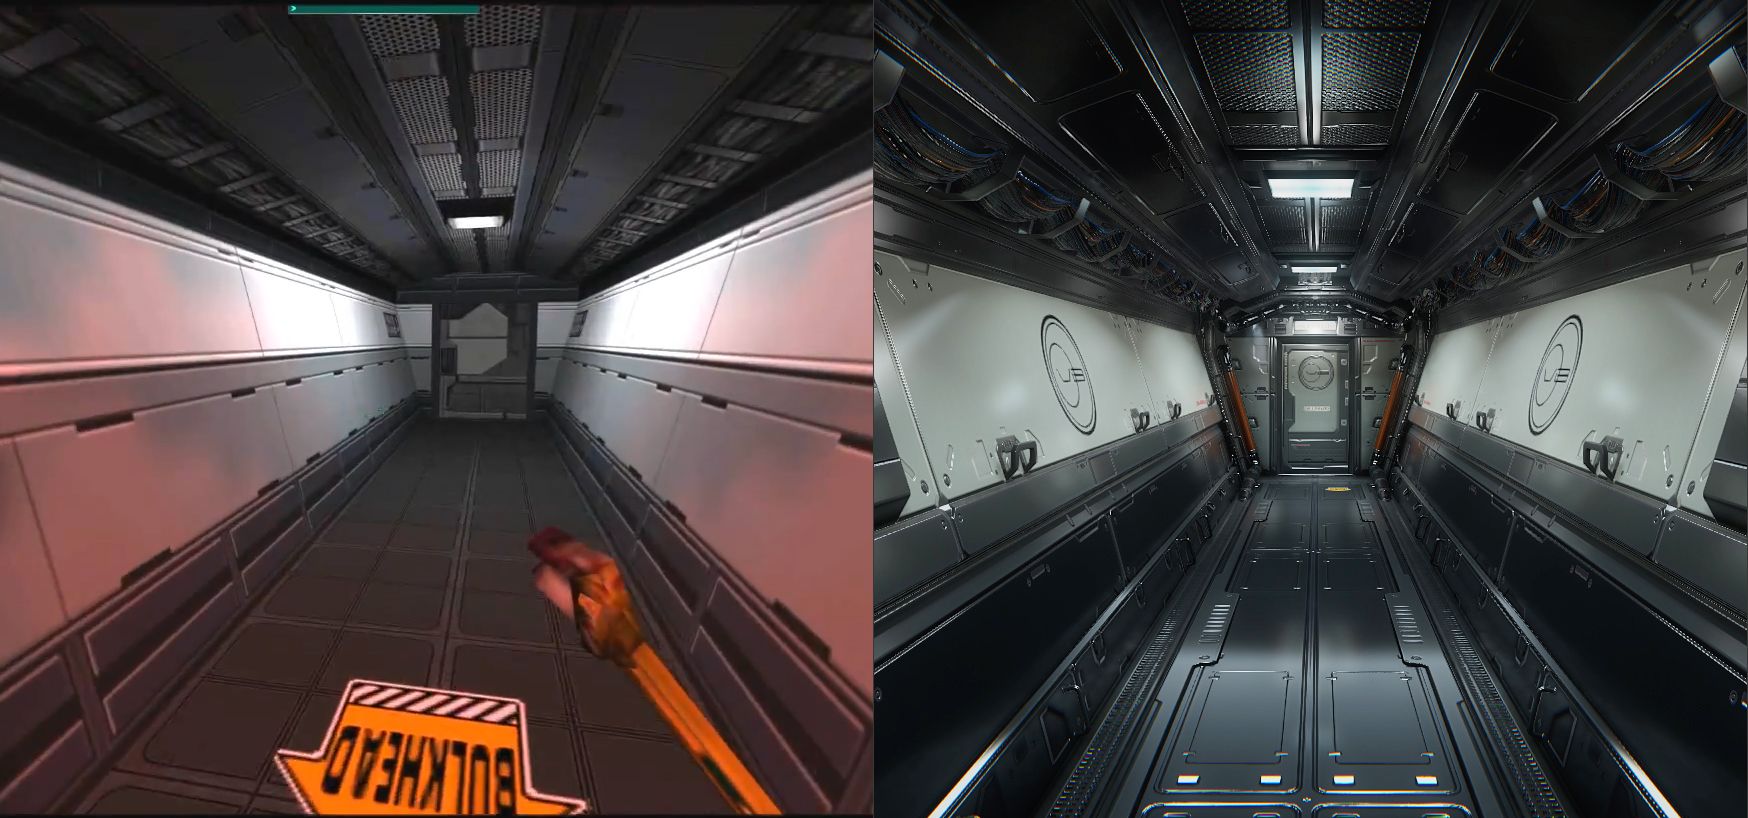 CE3] System Shock 2 Homage - polycount